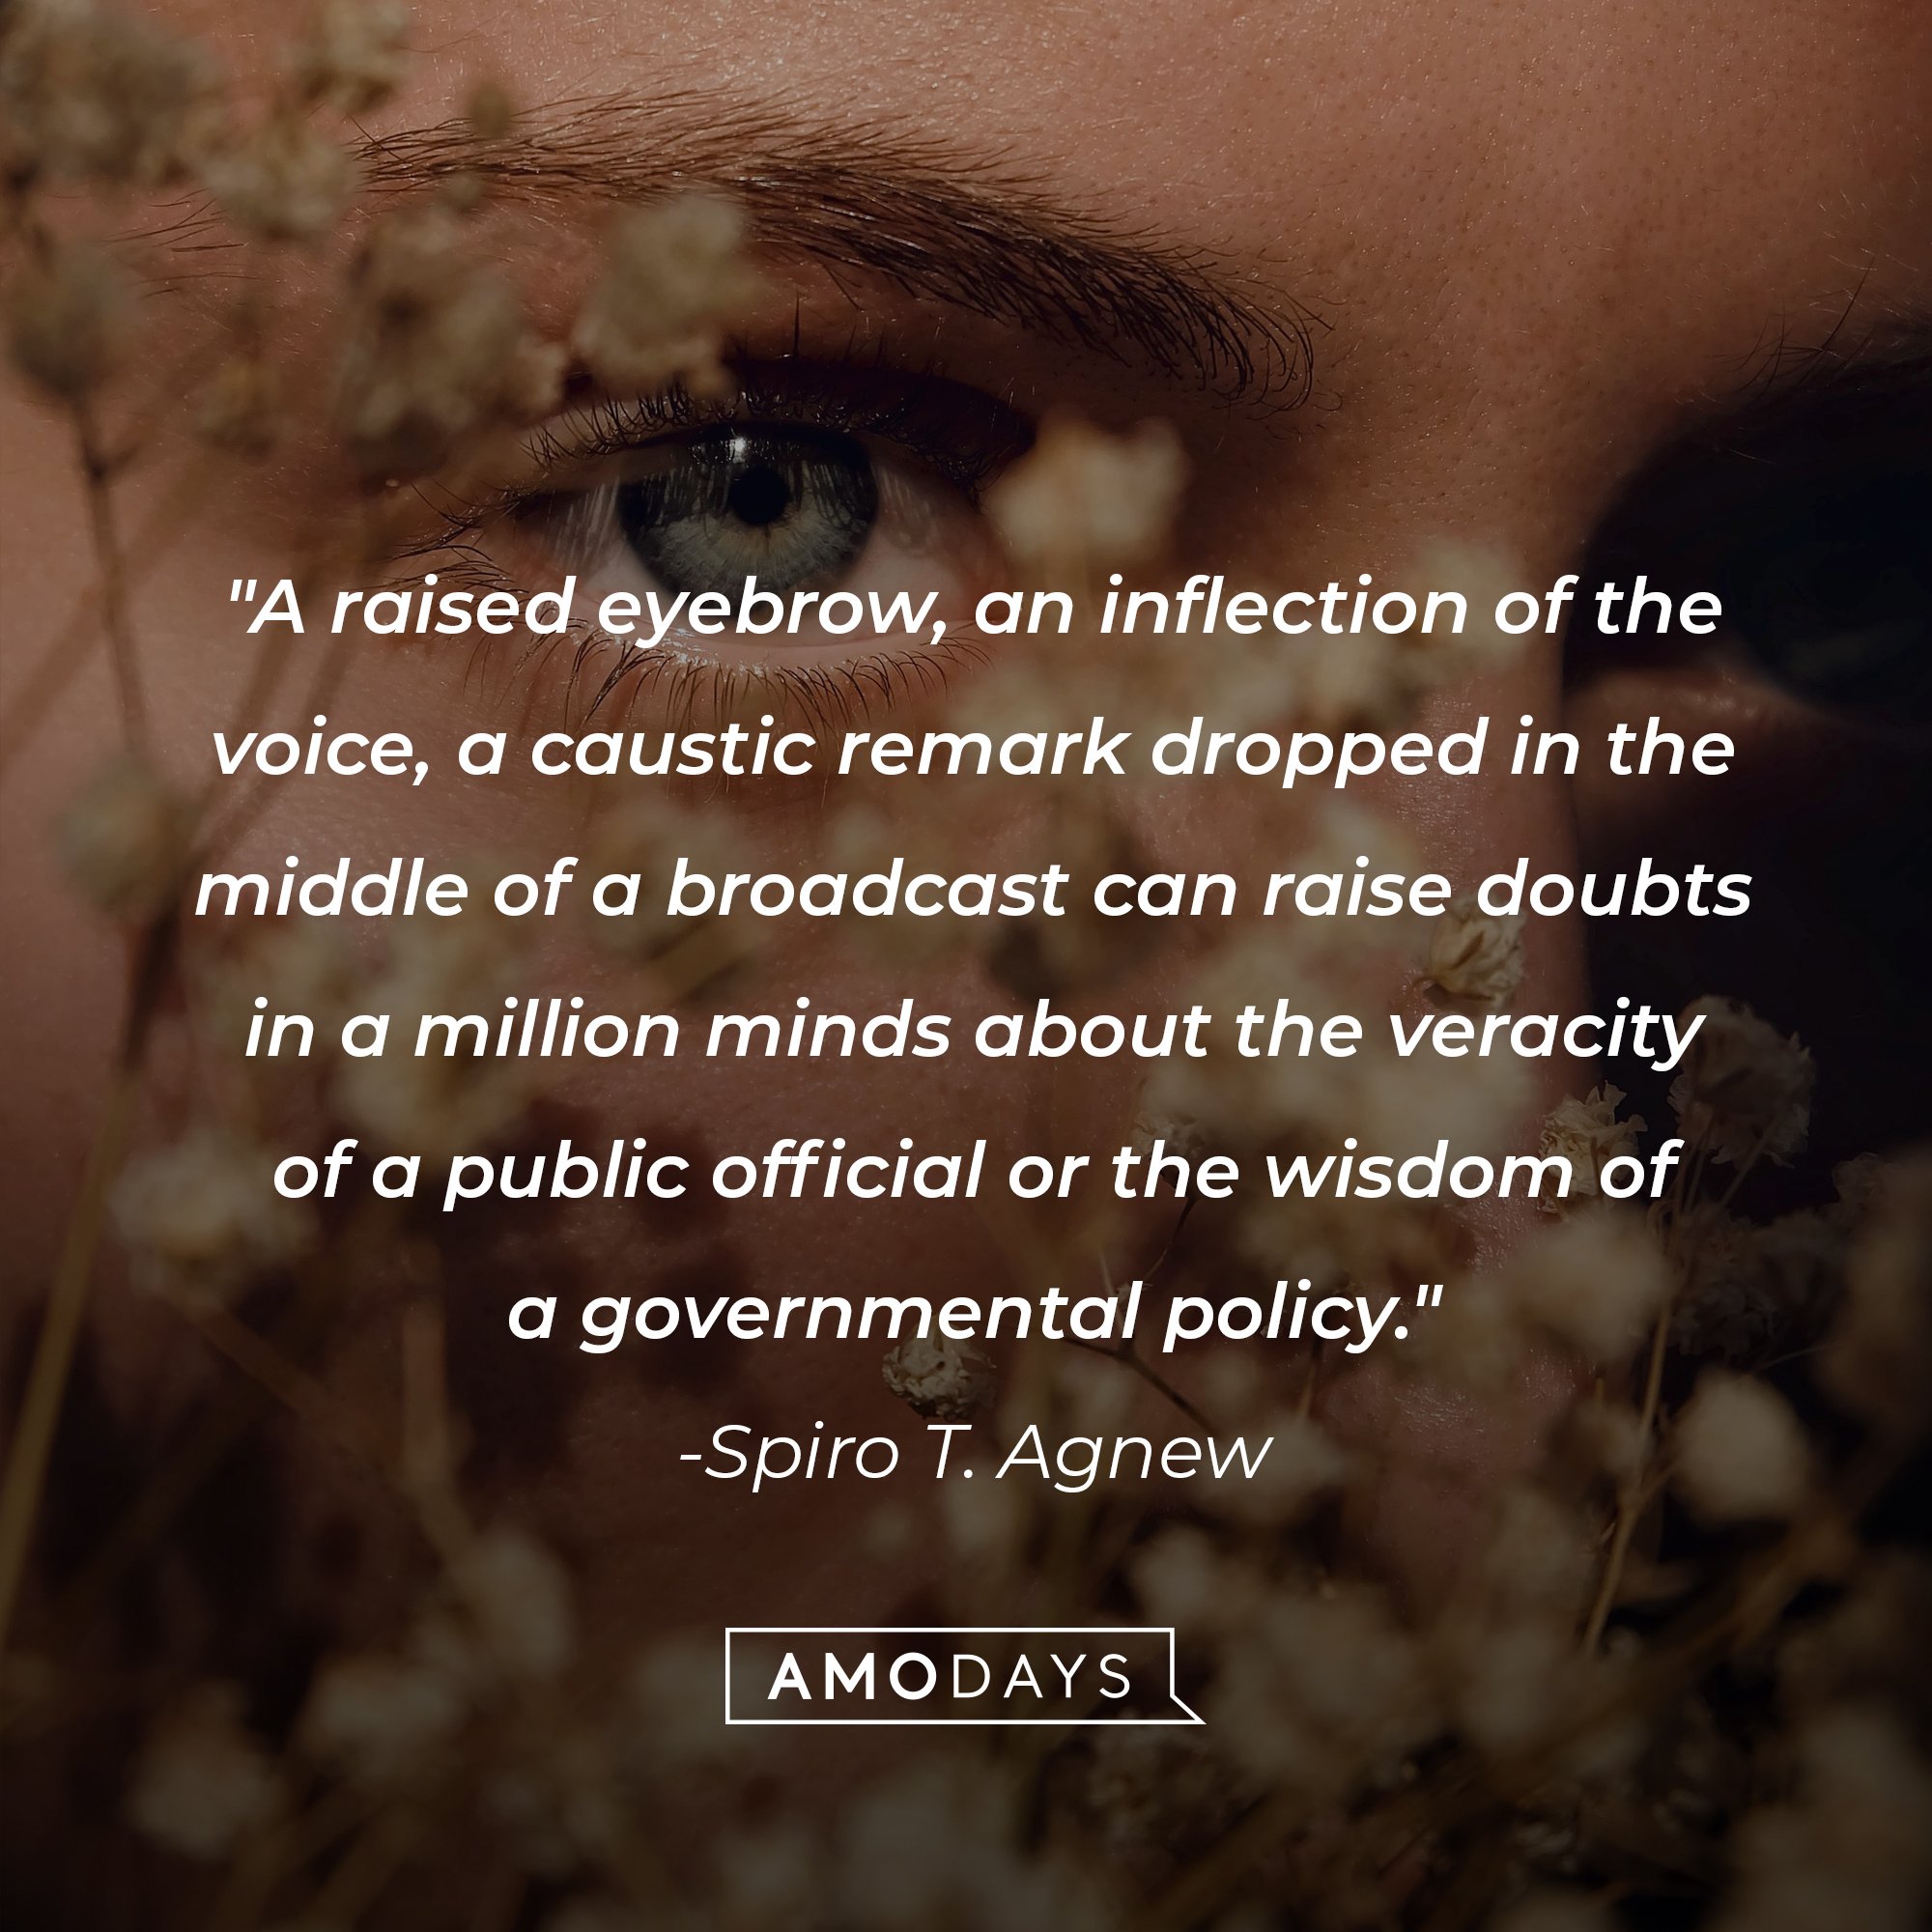 Spiro T. Agnew’s quote: "A raised eyebrow, an inflection of the voice, a caustic remark dropped in the middle of a broadcast can raise doubts in a million minds about the veracity of a public official or the wisdom of a governmental policy." | Image: AmoDays  